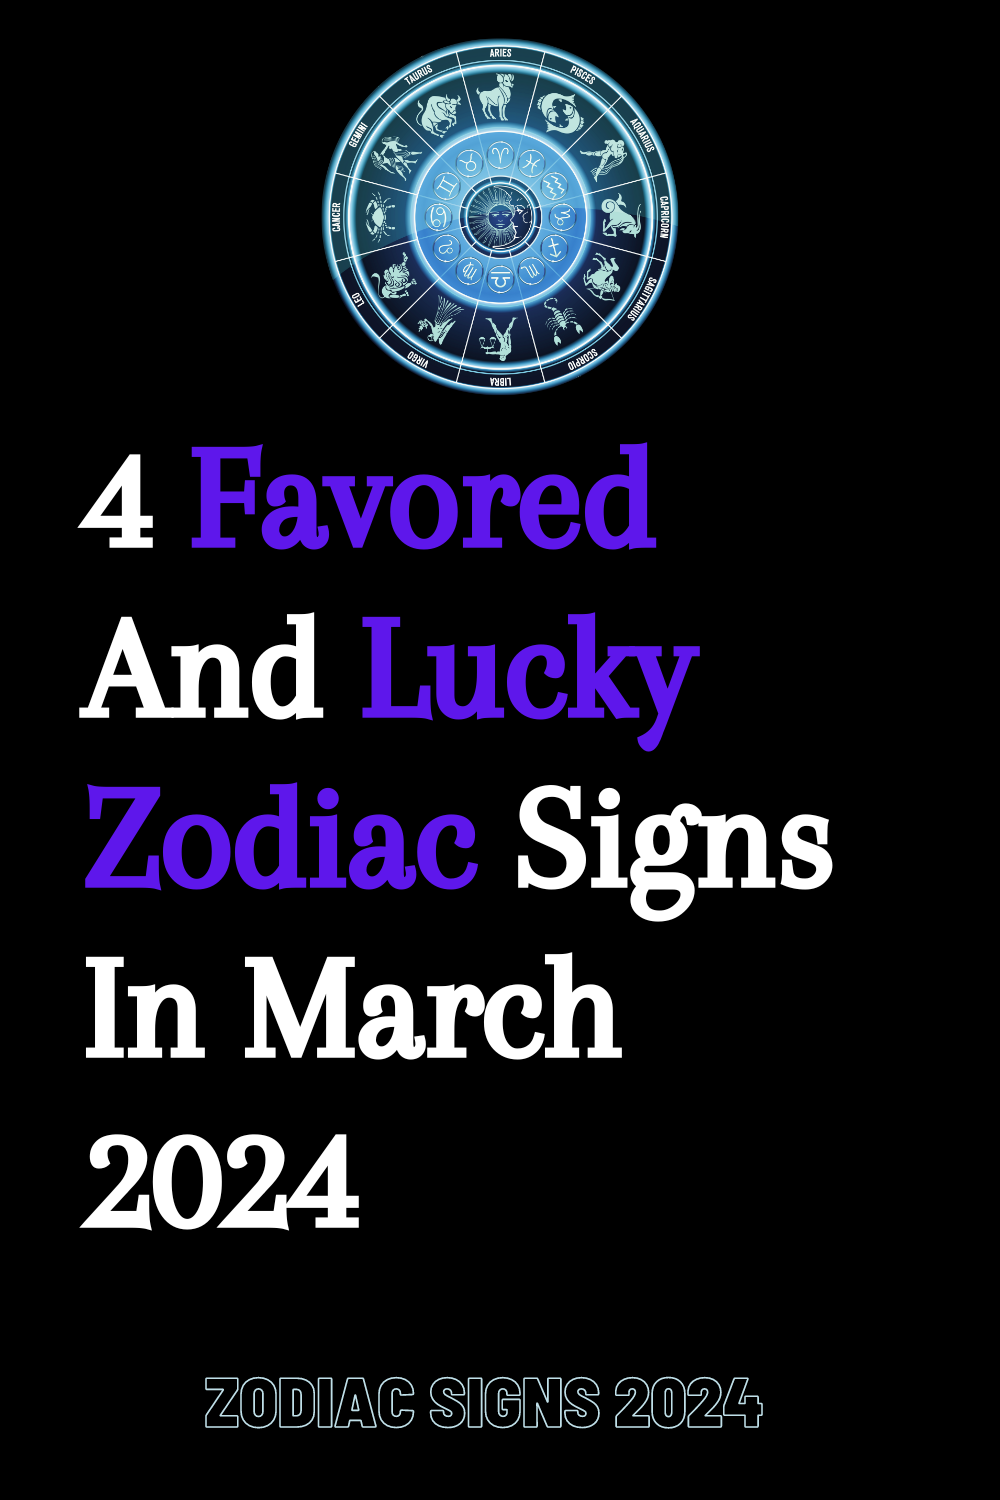 4 Favored And Lucky Zodiac Signs In March 2024